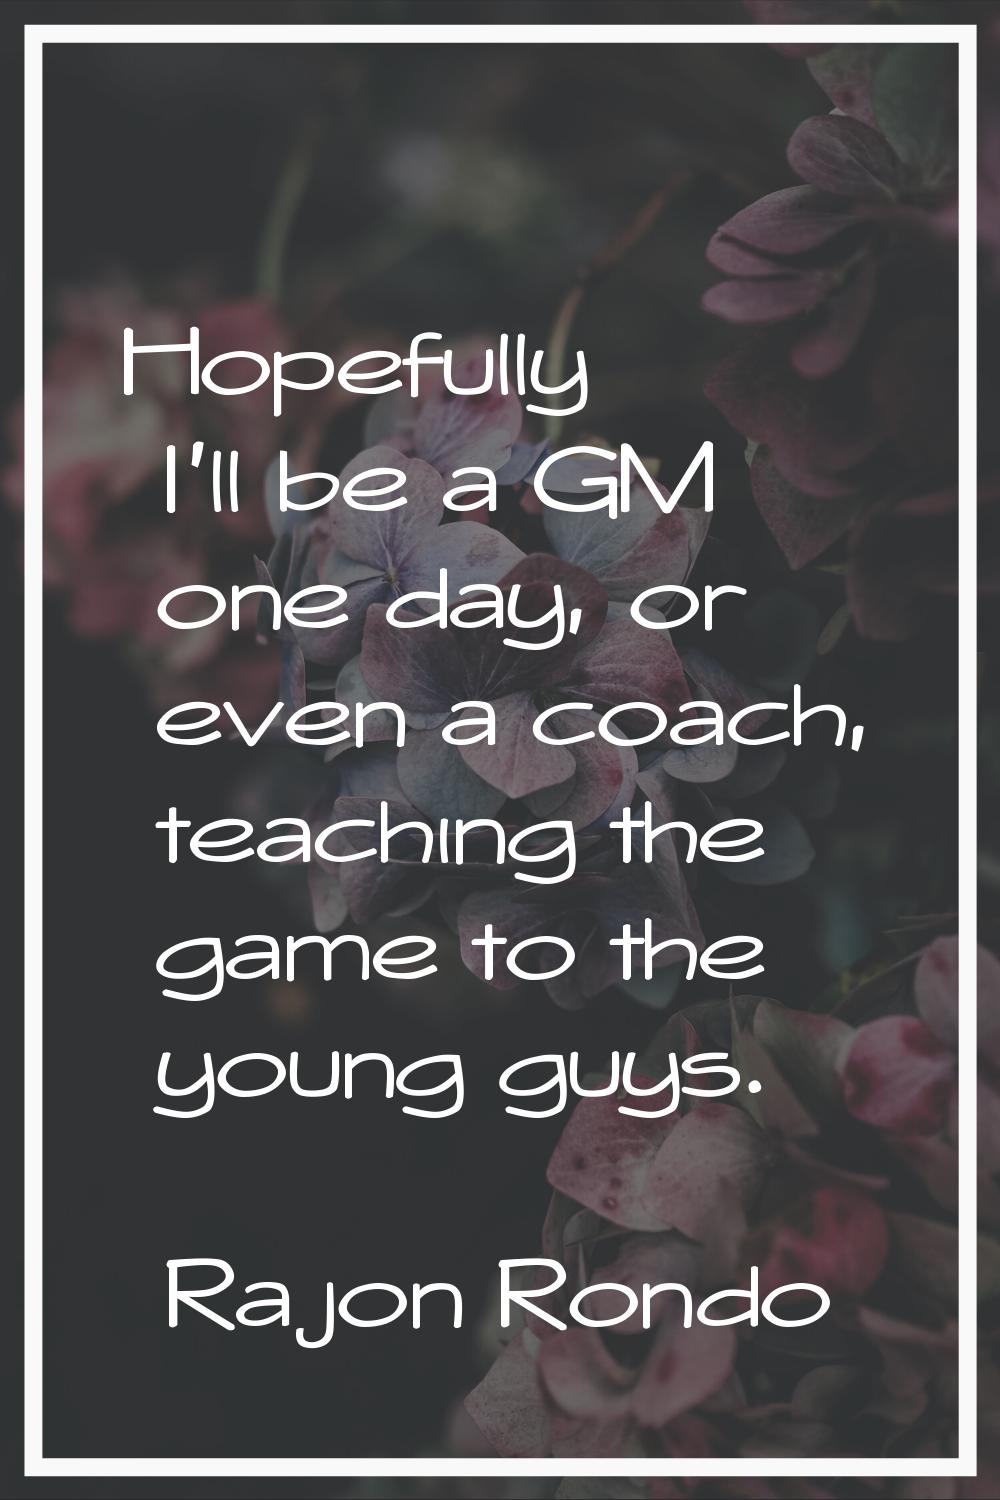 Hopefully I'll be a GM one day, or even a coach, teaching the game to the young guys.